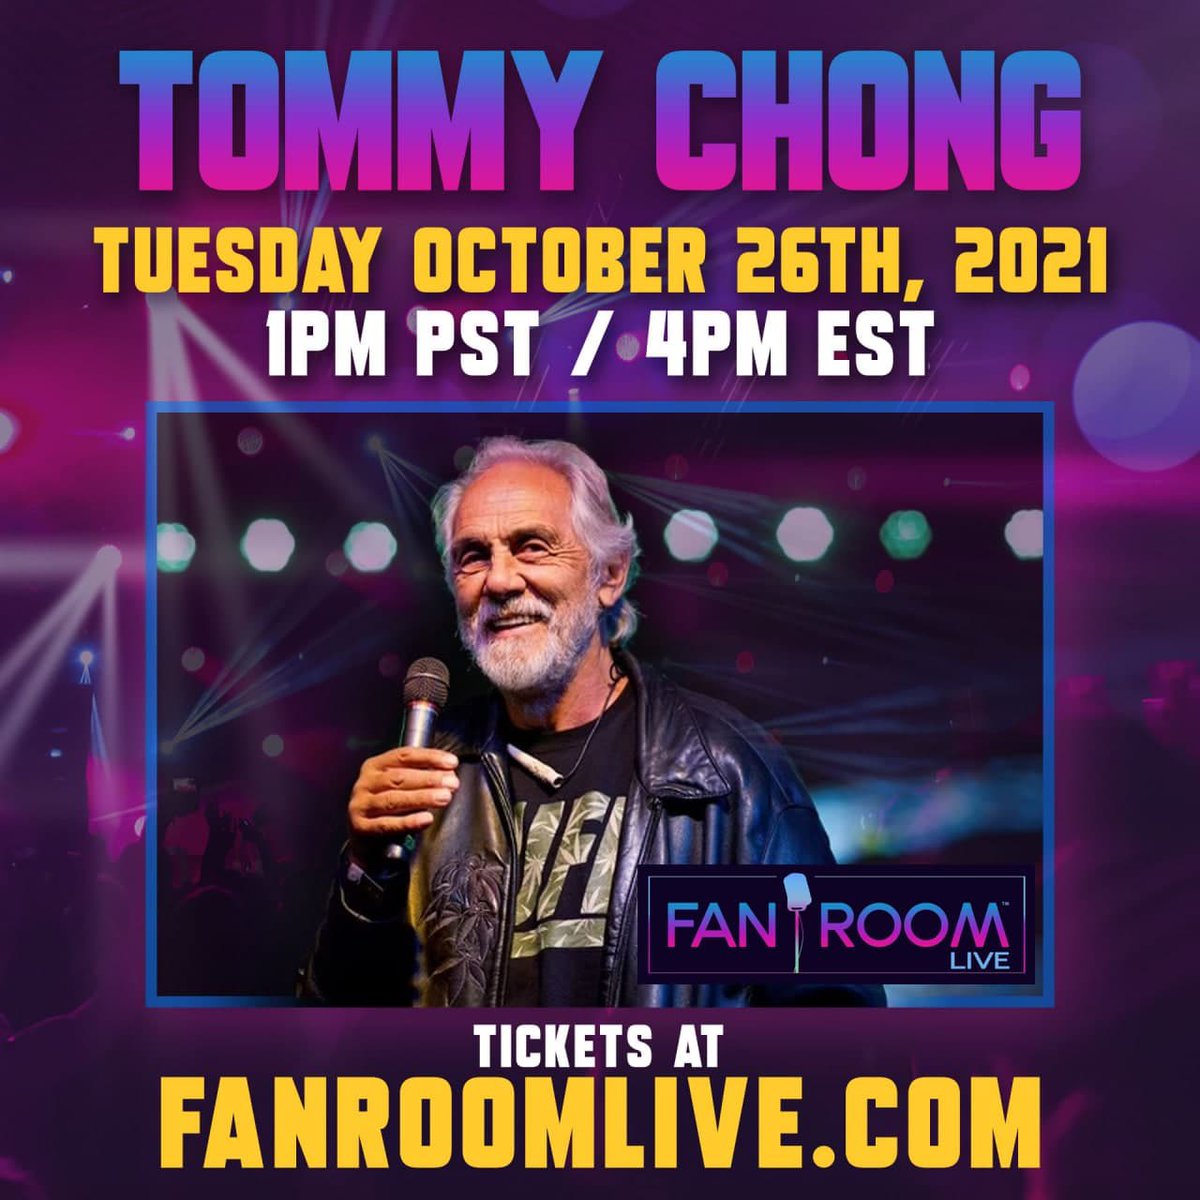 Come hang, meet and speak with @tommychong LIVE FACE2FACE on @fanroomlive OCTOBER 26th 1pm PST / 4PM EST! “BE-IN-THE-ROOM!” #FanRoomLive #FanRoom #ad Grab your tix at fanroomlive.com @CedEntertainer @fanroomlive @JaeBenjamin @tommychong @JeffKrauss